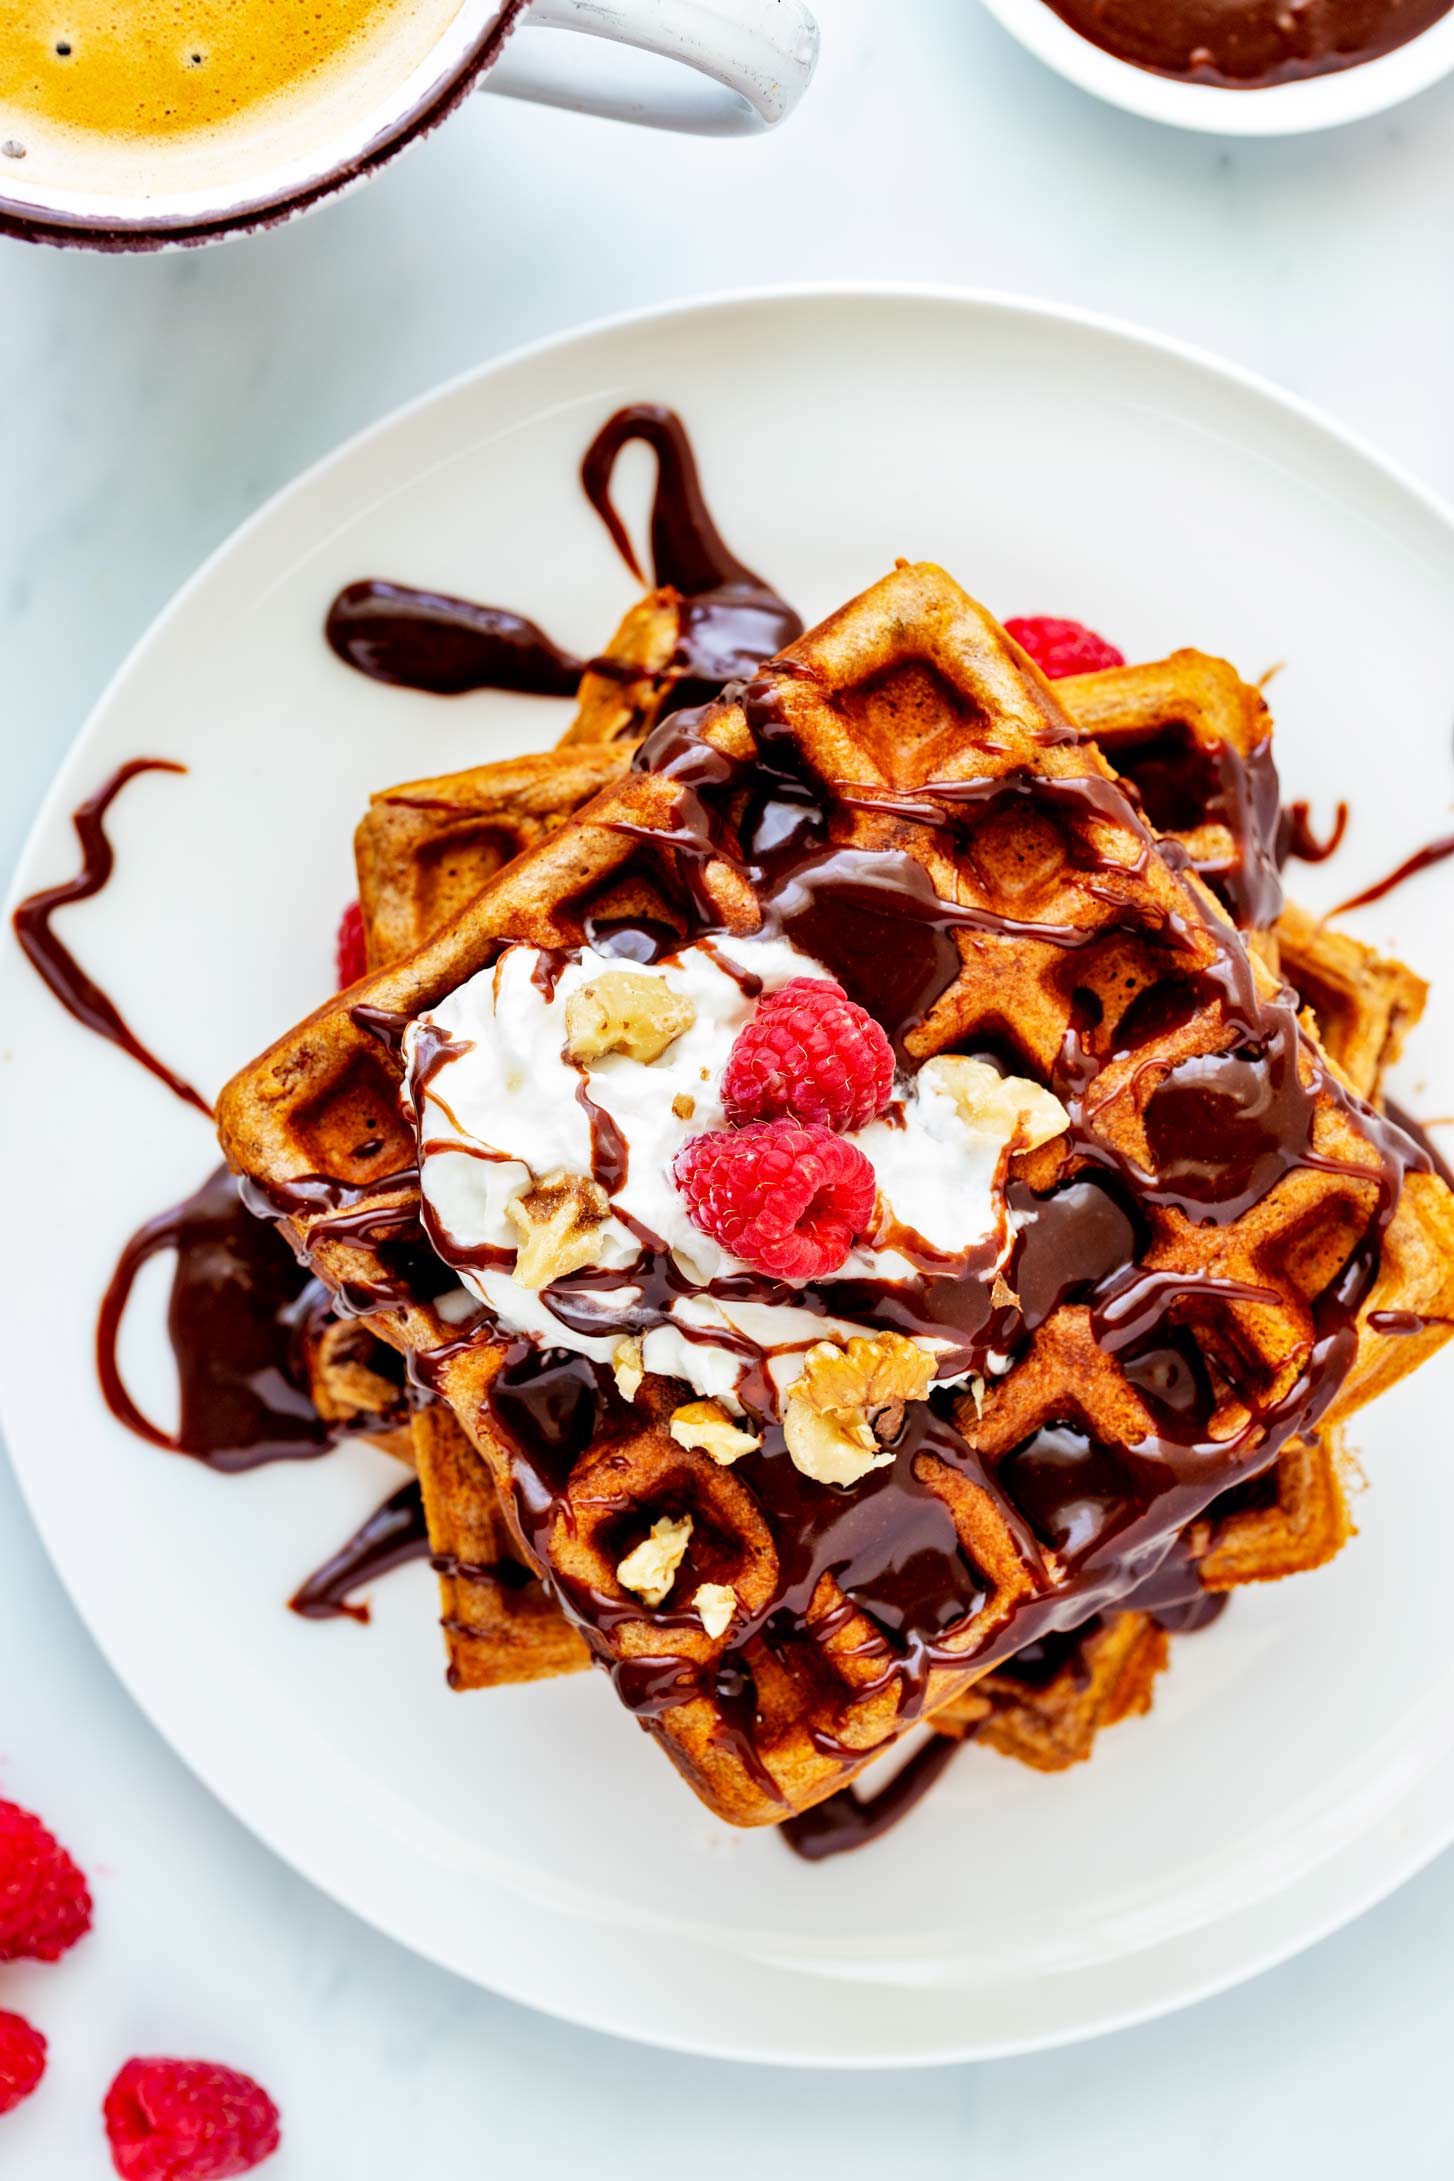 Overhead photo of nutella waffles on a white plate with nutella, whipped cream, berries, and nuts.